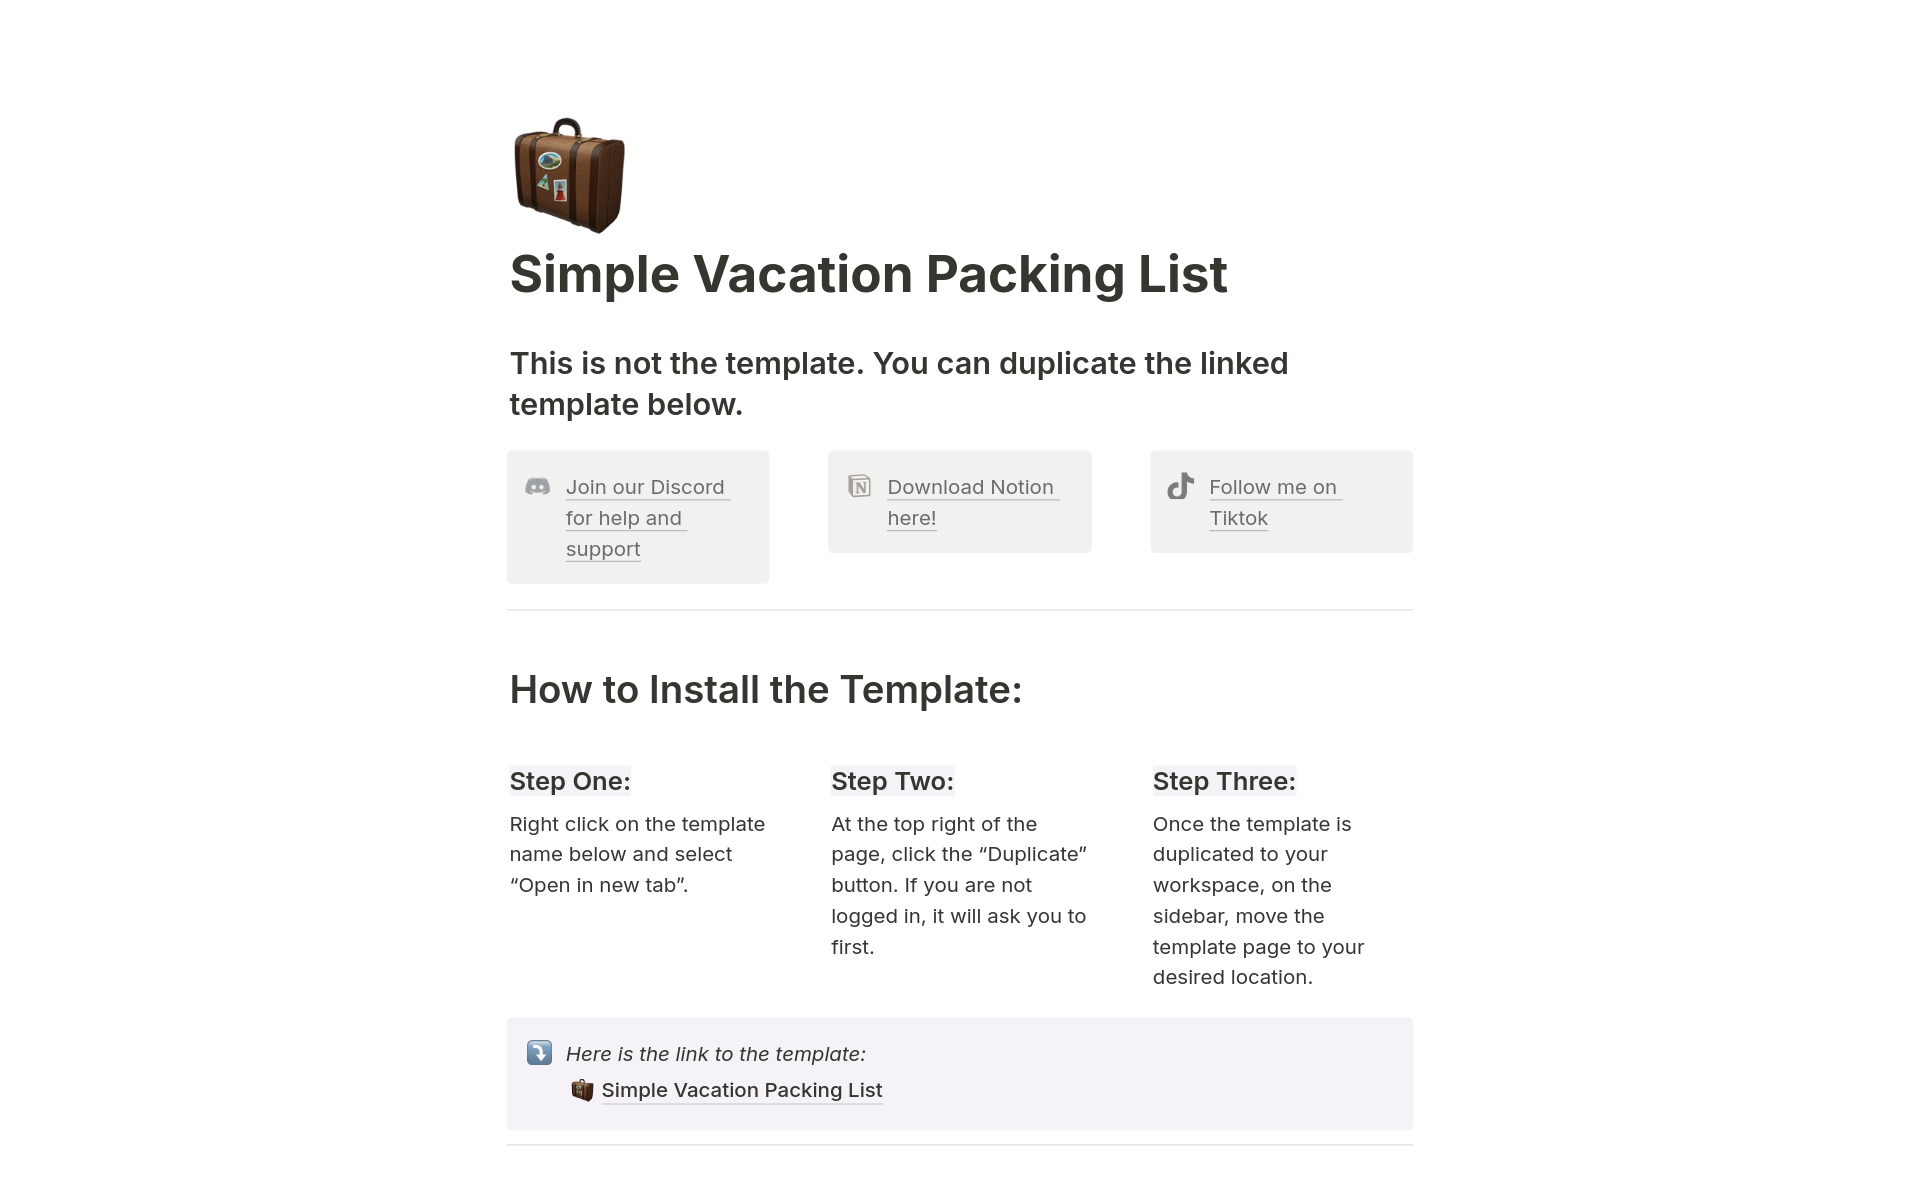 A single page Notion template with three pre-made packing lists tailored to different weather conditions, ensuring you have everything you need for hot, chilly, or cold weather. It also includes a mobile page for easy access while you pack, and a travel journal with prompts.